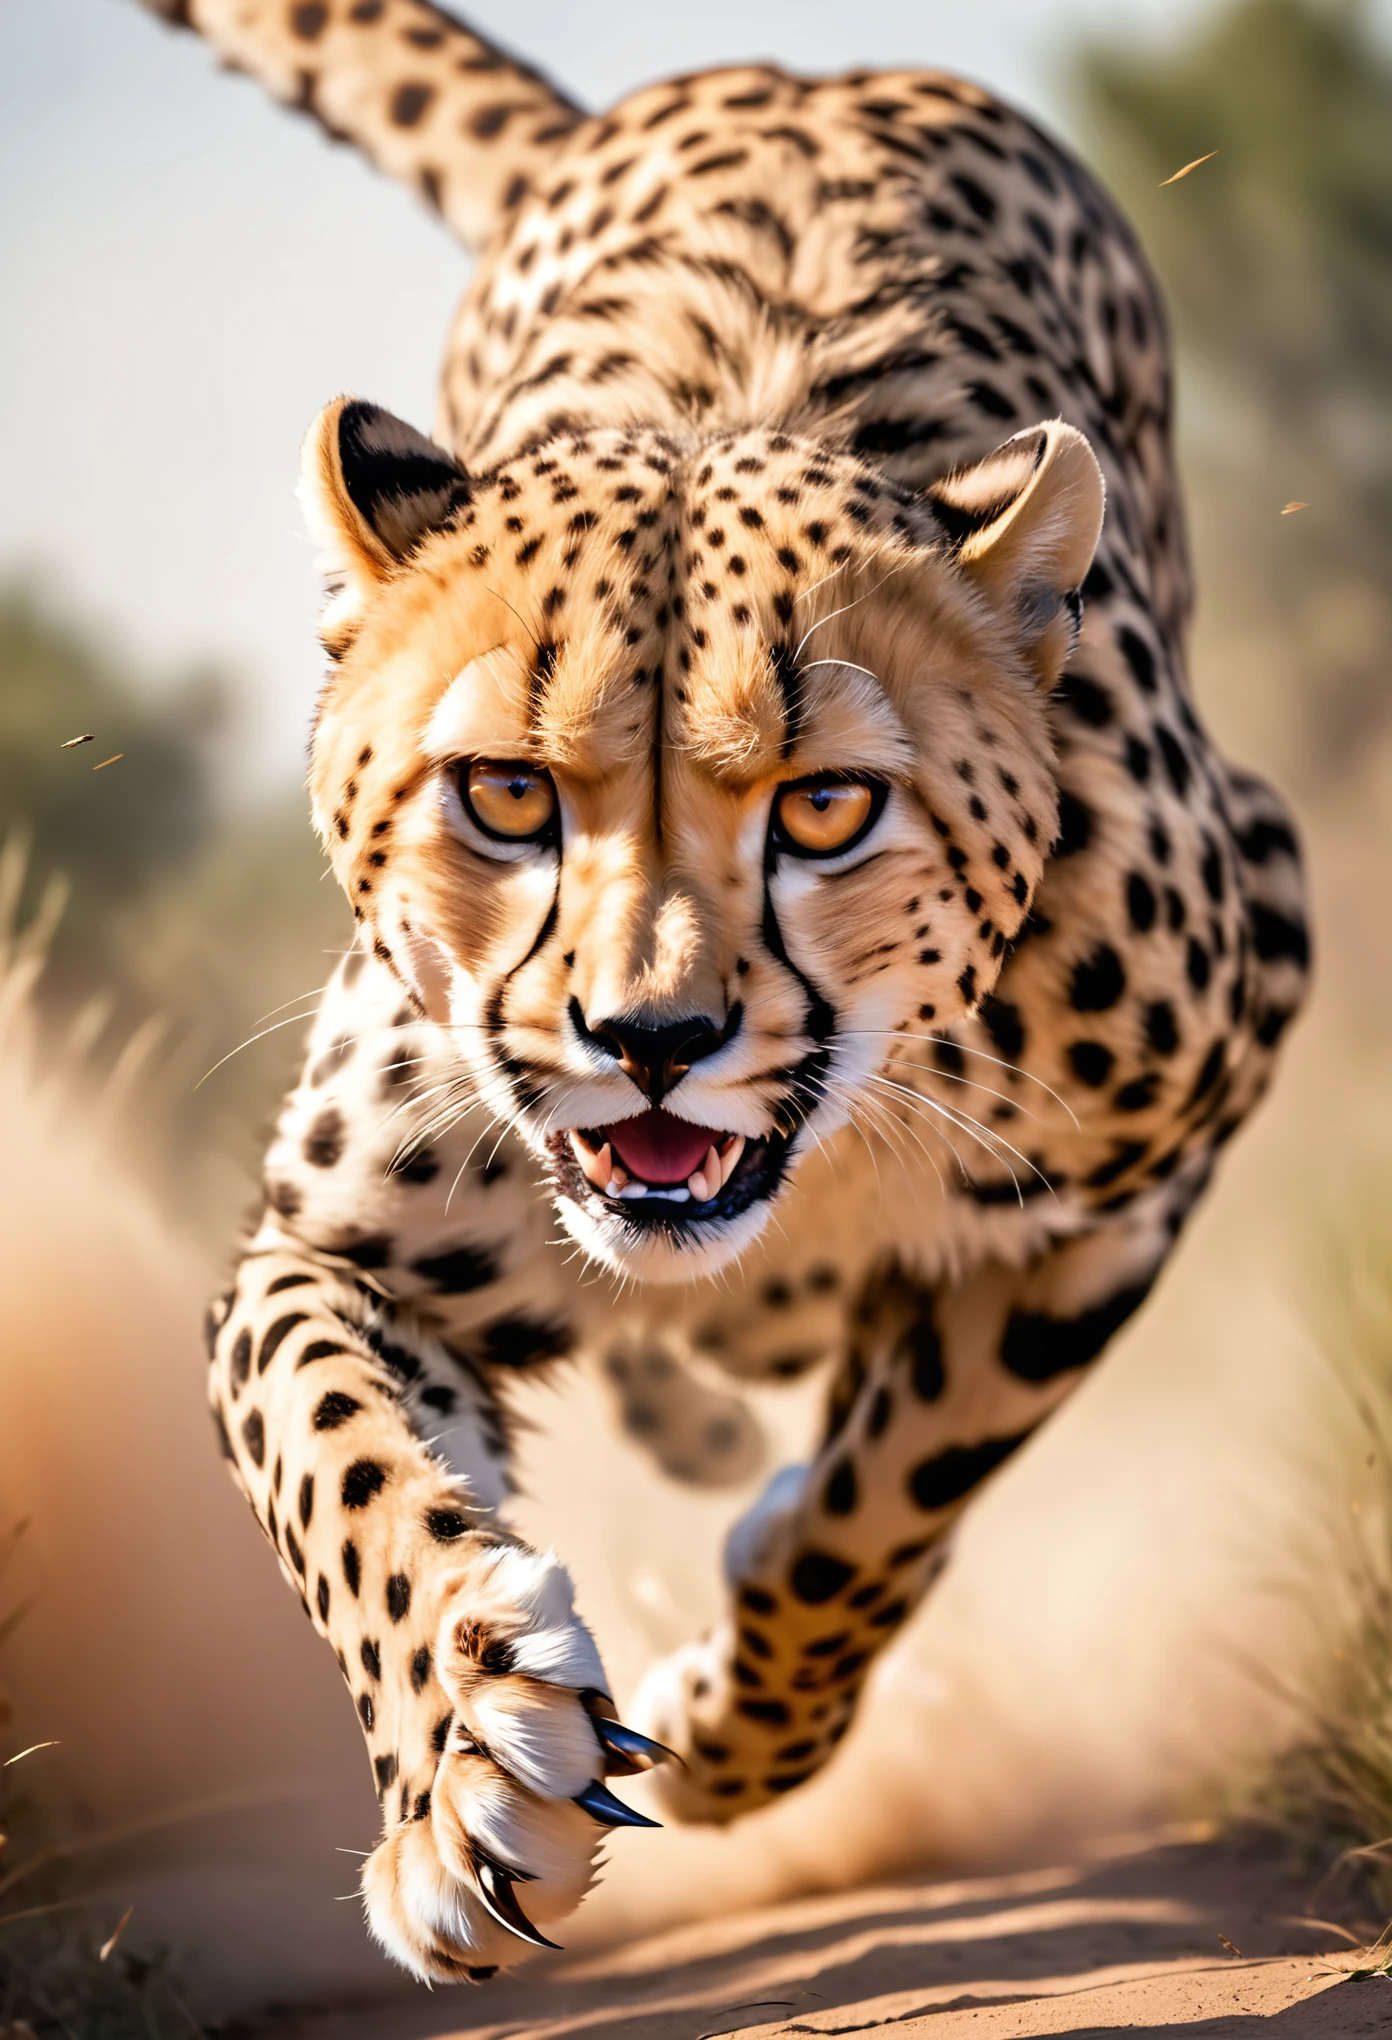 Realistic photos, RAW Photos, Cheetah attacks viewer, Powerful movements, jump on prey, ((Dynamic jump)), Sharp Claws, Cheetah approaching from above, sudden approach, Bad-tempered, dynamic Shot from grand